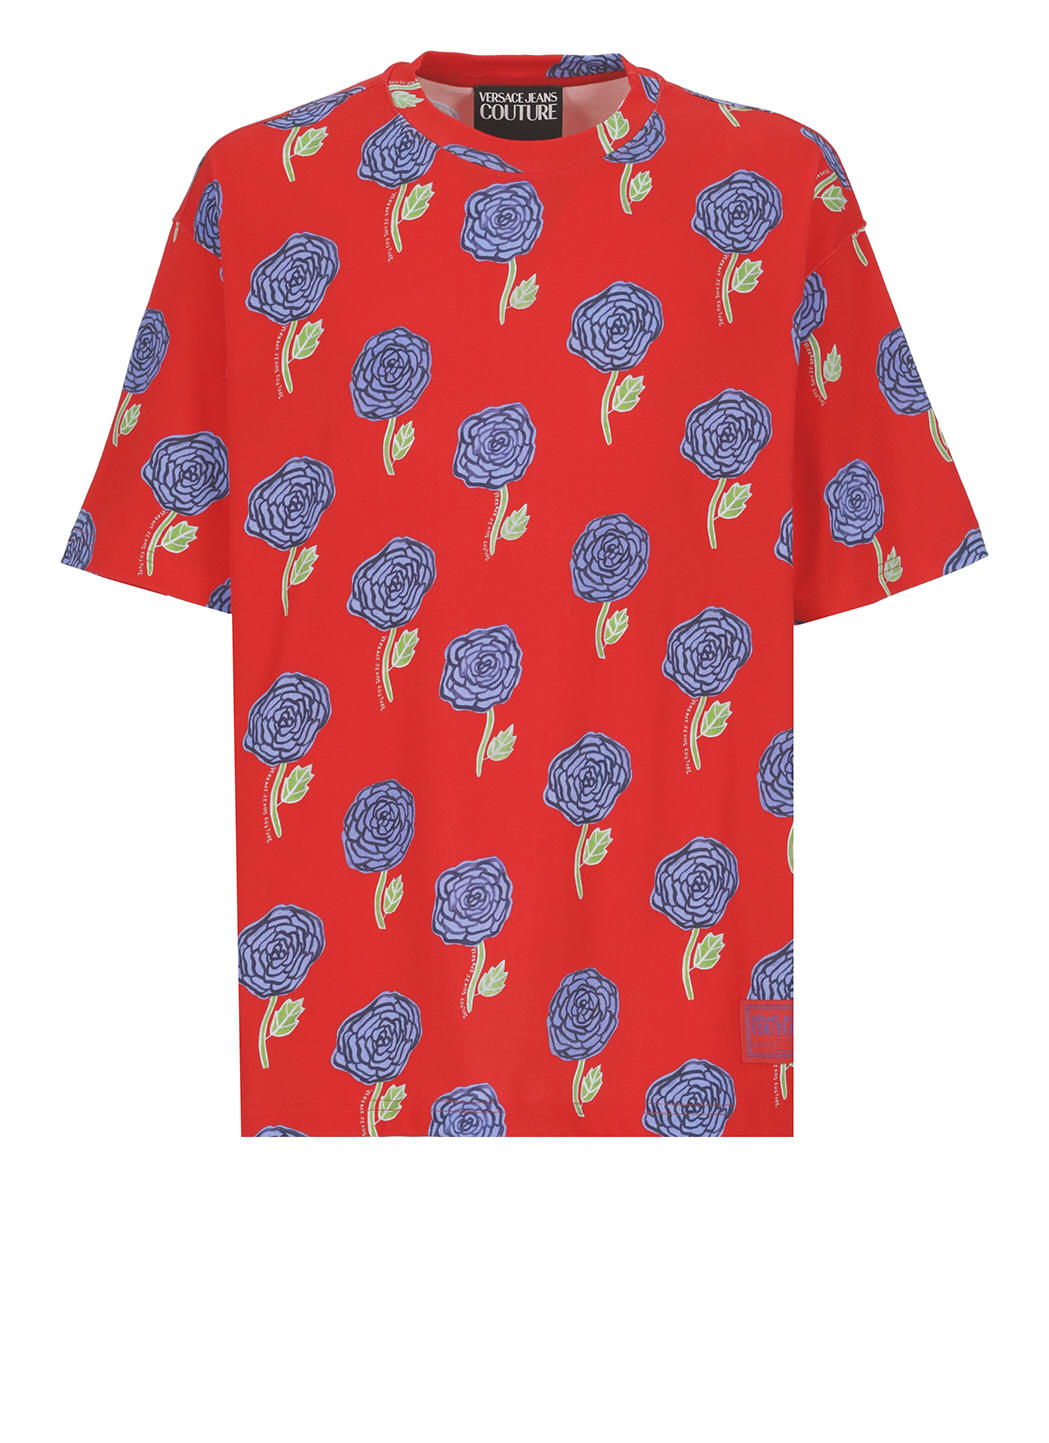 VERSACE JEANS COUTURE ROSES T-SHIRT